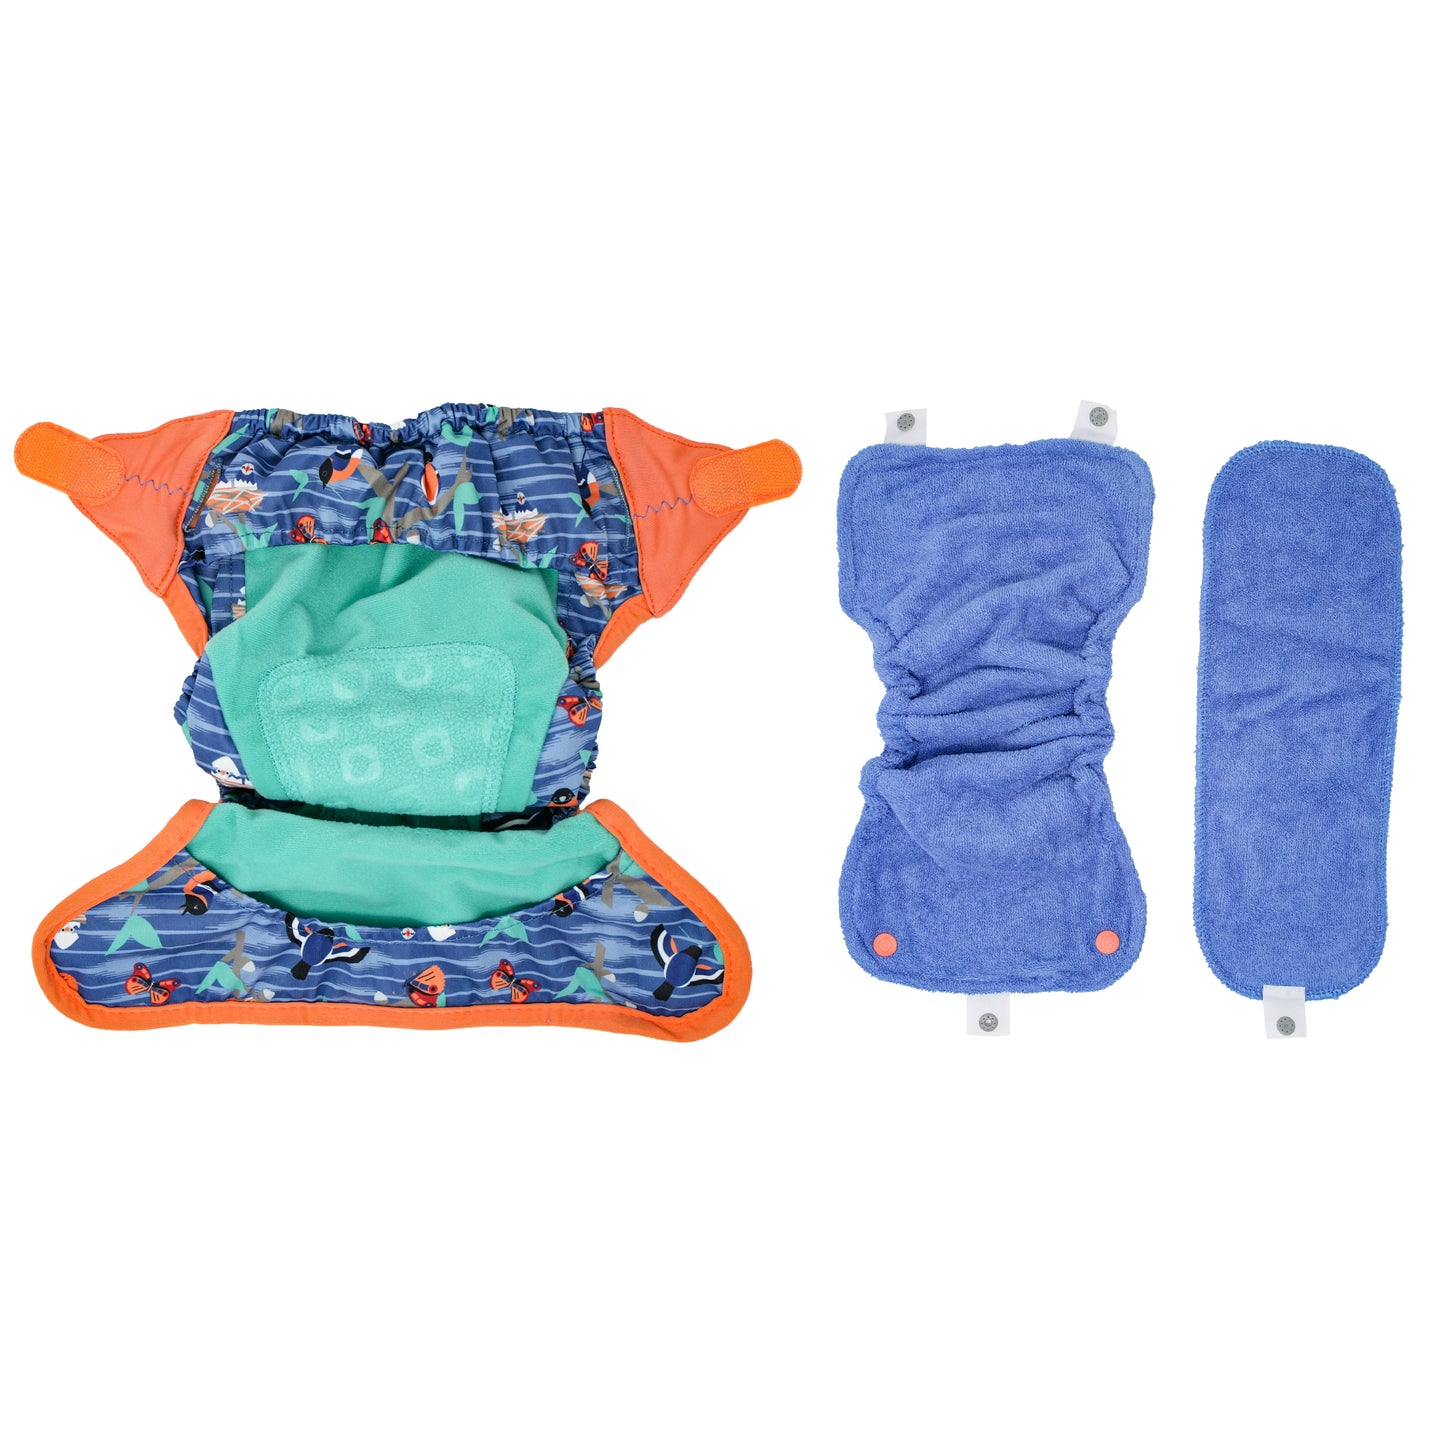 Parts Of Blue Orange Pop-in One Size Twilight Garden Reusable Cloth Nappy, With Velcro Fastening